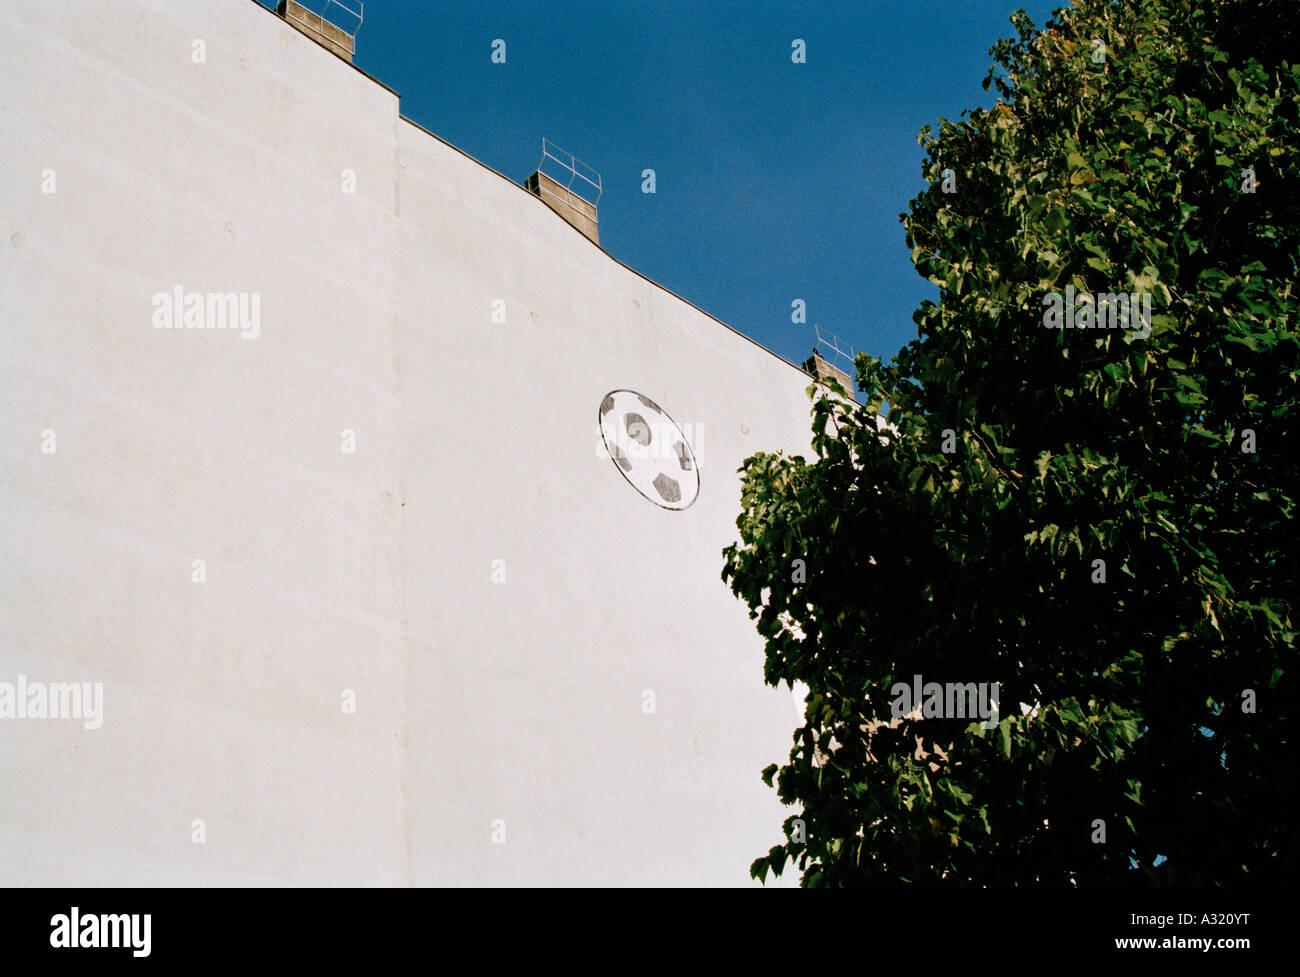 Soccer ball mural high up on a wall Stock Photo